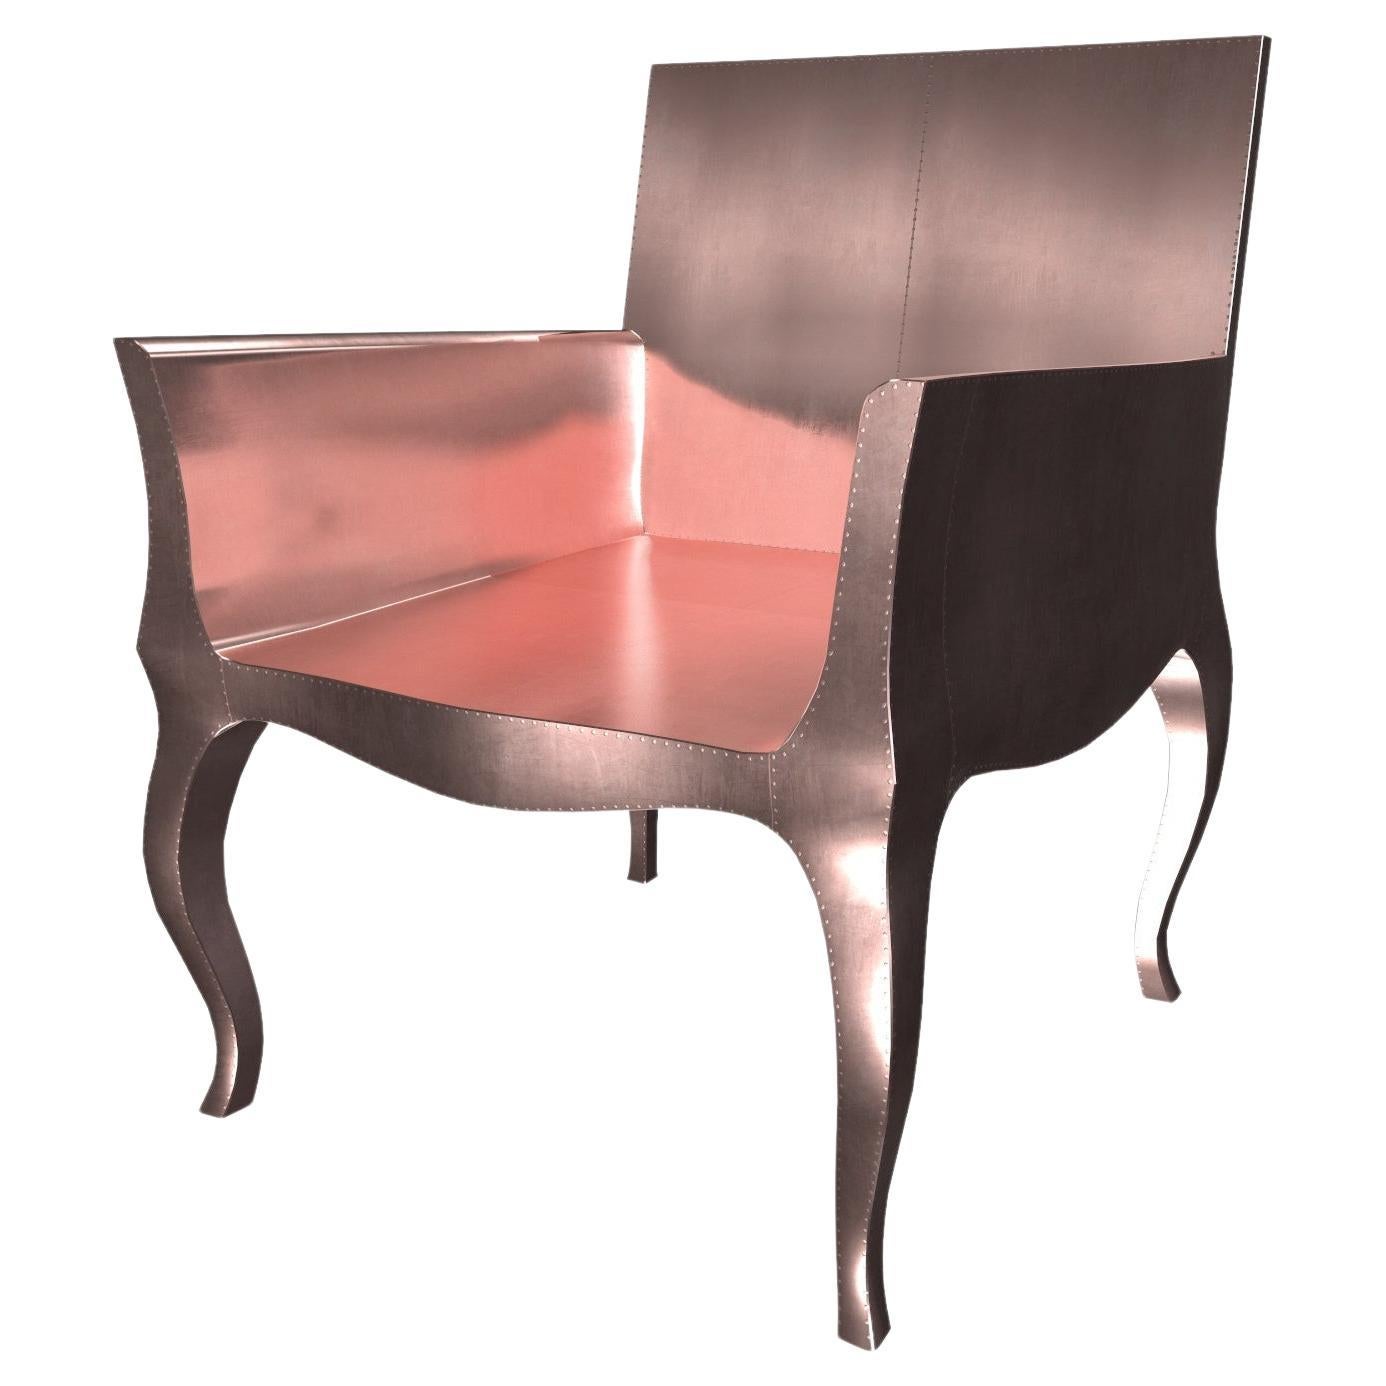 Art Deco Armchairs in Smooth Copper by Paul Mathieu for S. Odegard